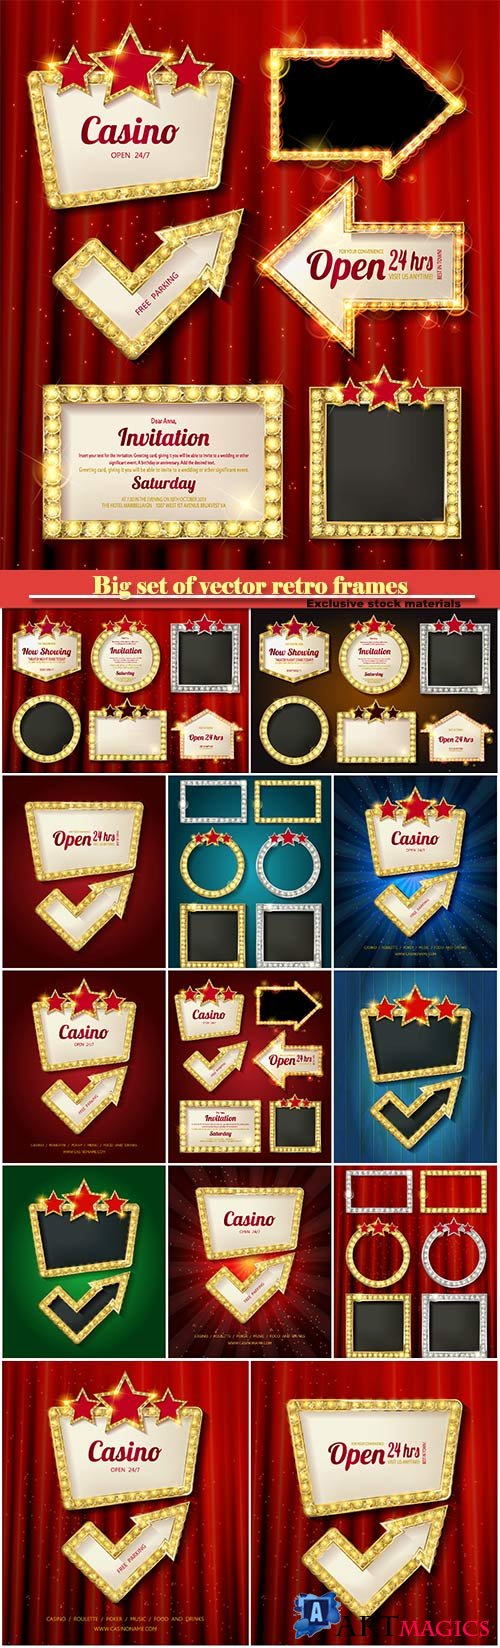 Big set of vector retro frames with glowing lamps, banners with shining lights